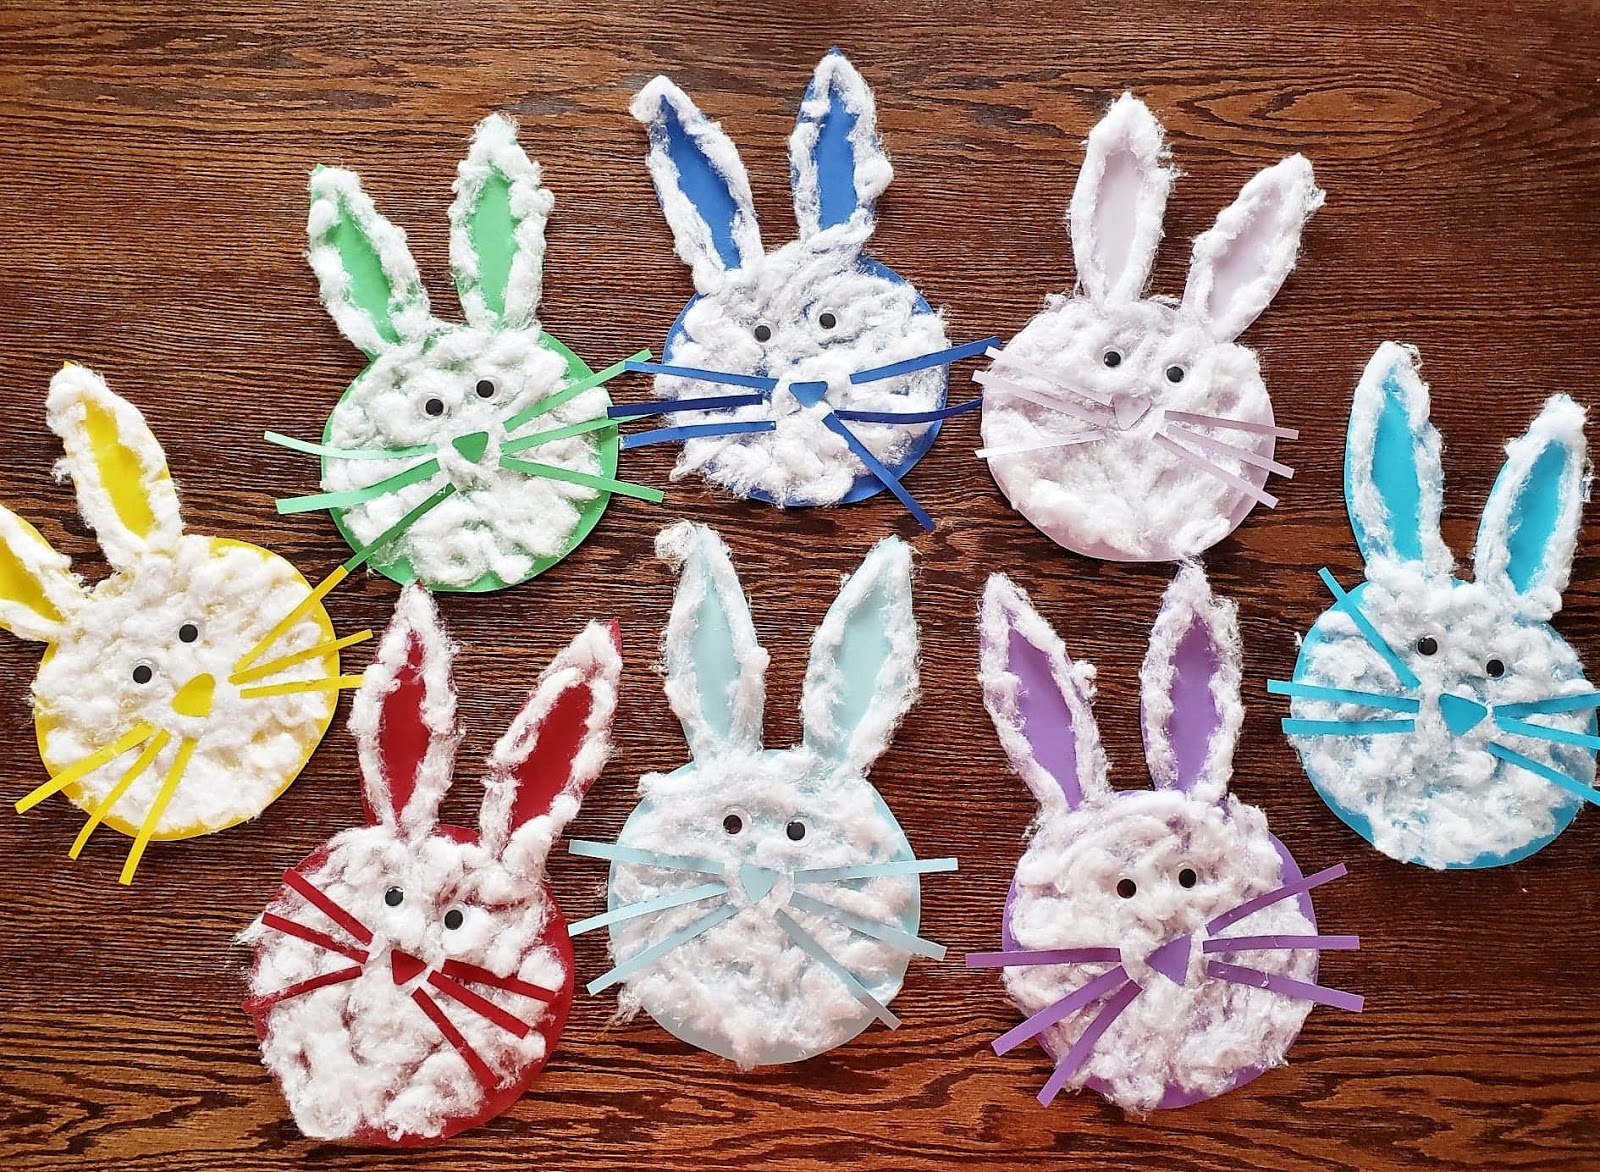 Easter Crafts for Kids: Cotton Ball Bunnies! - Making Things is